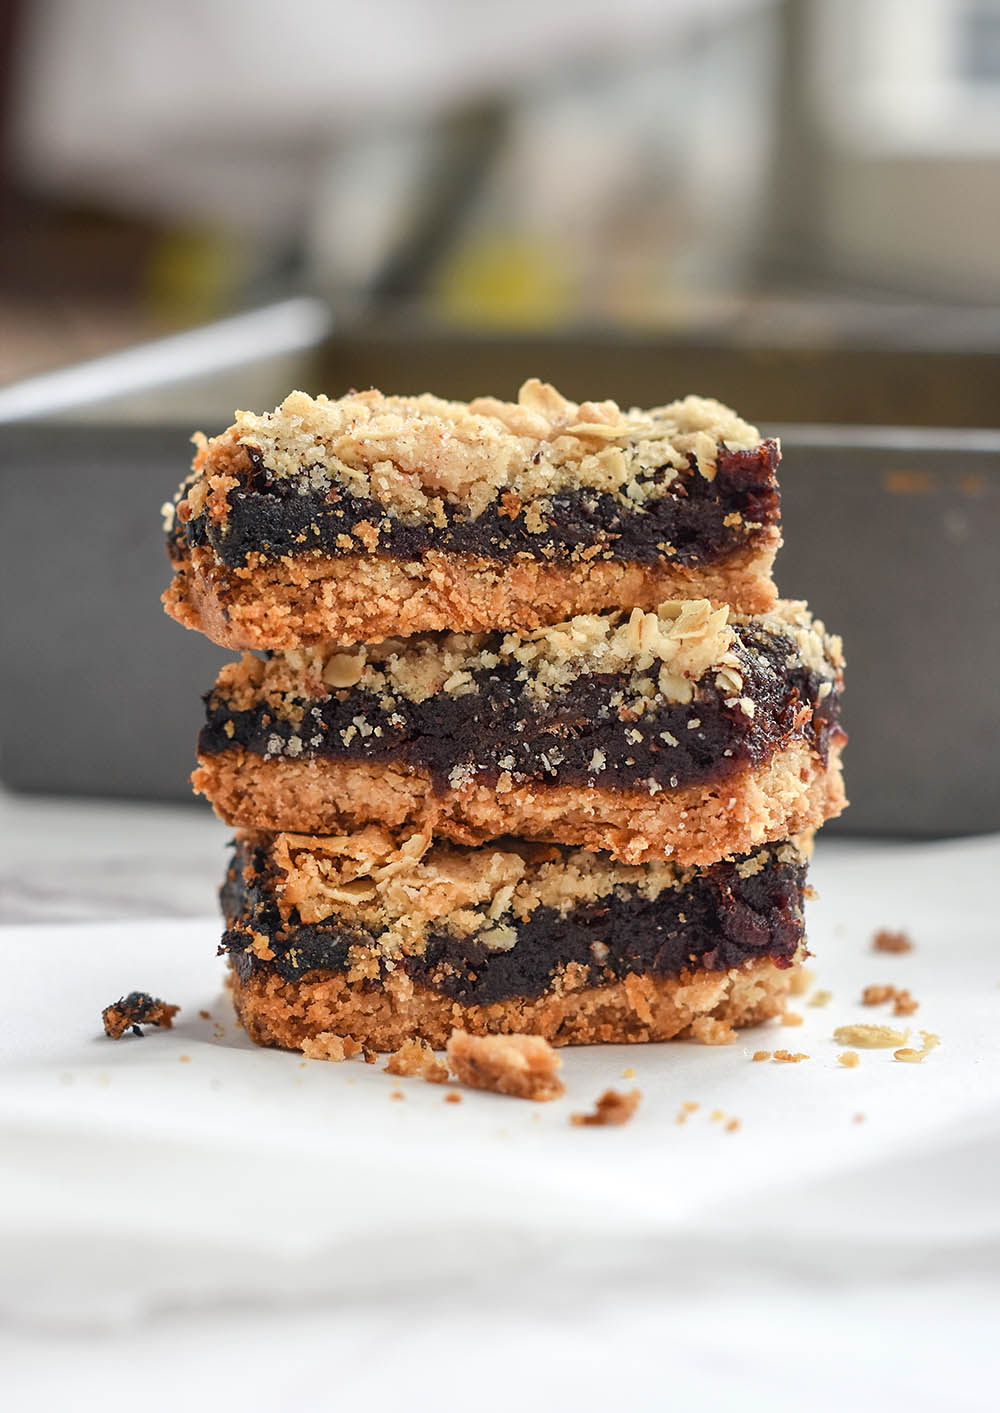 old-fashioned date bars with buttery crust, date filling, and oatmeal crumble